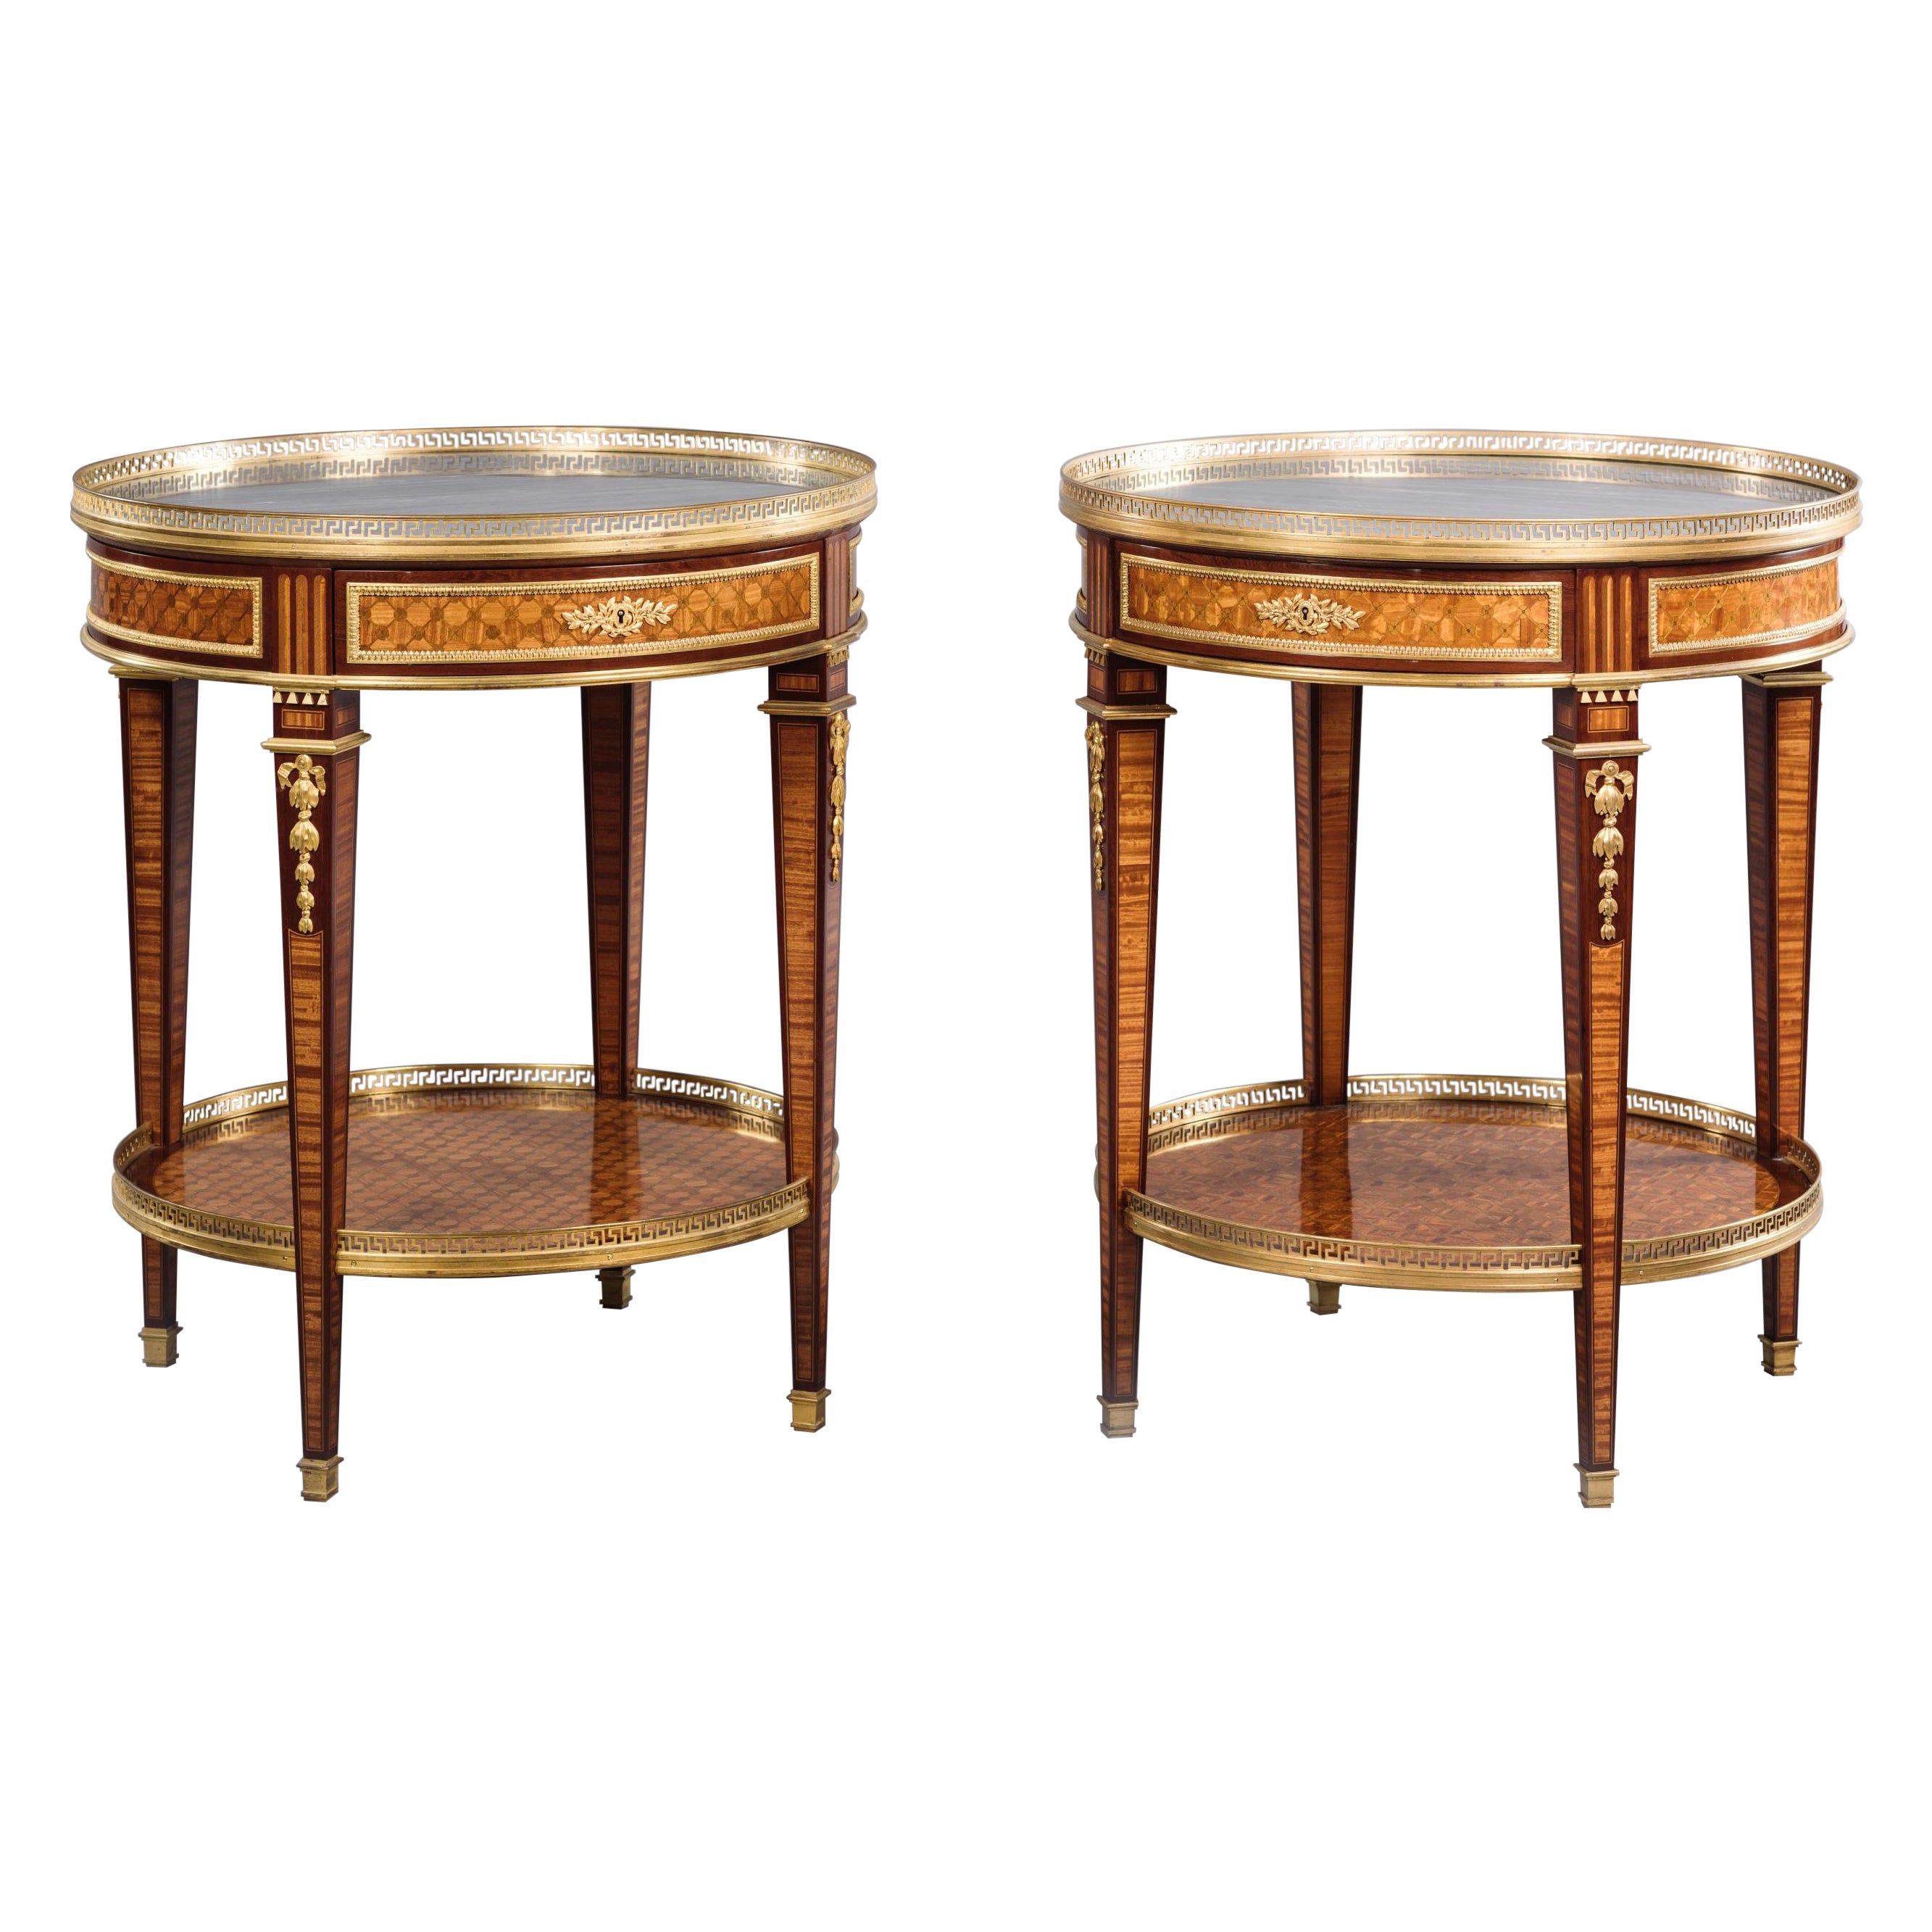 Rare Pair of Louis XVI Style Mounted Parquetry Gueridons